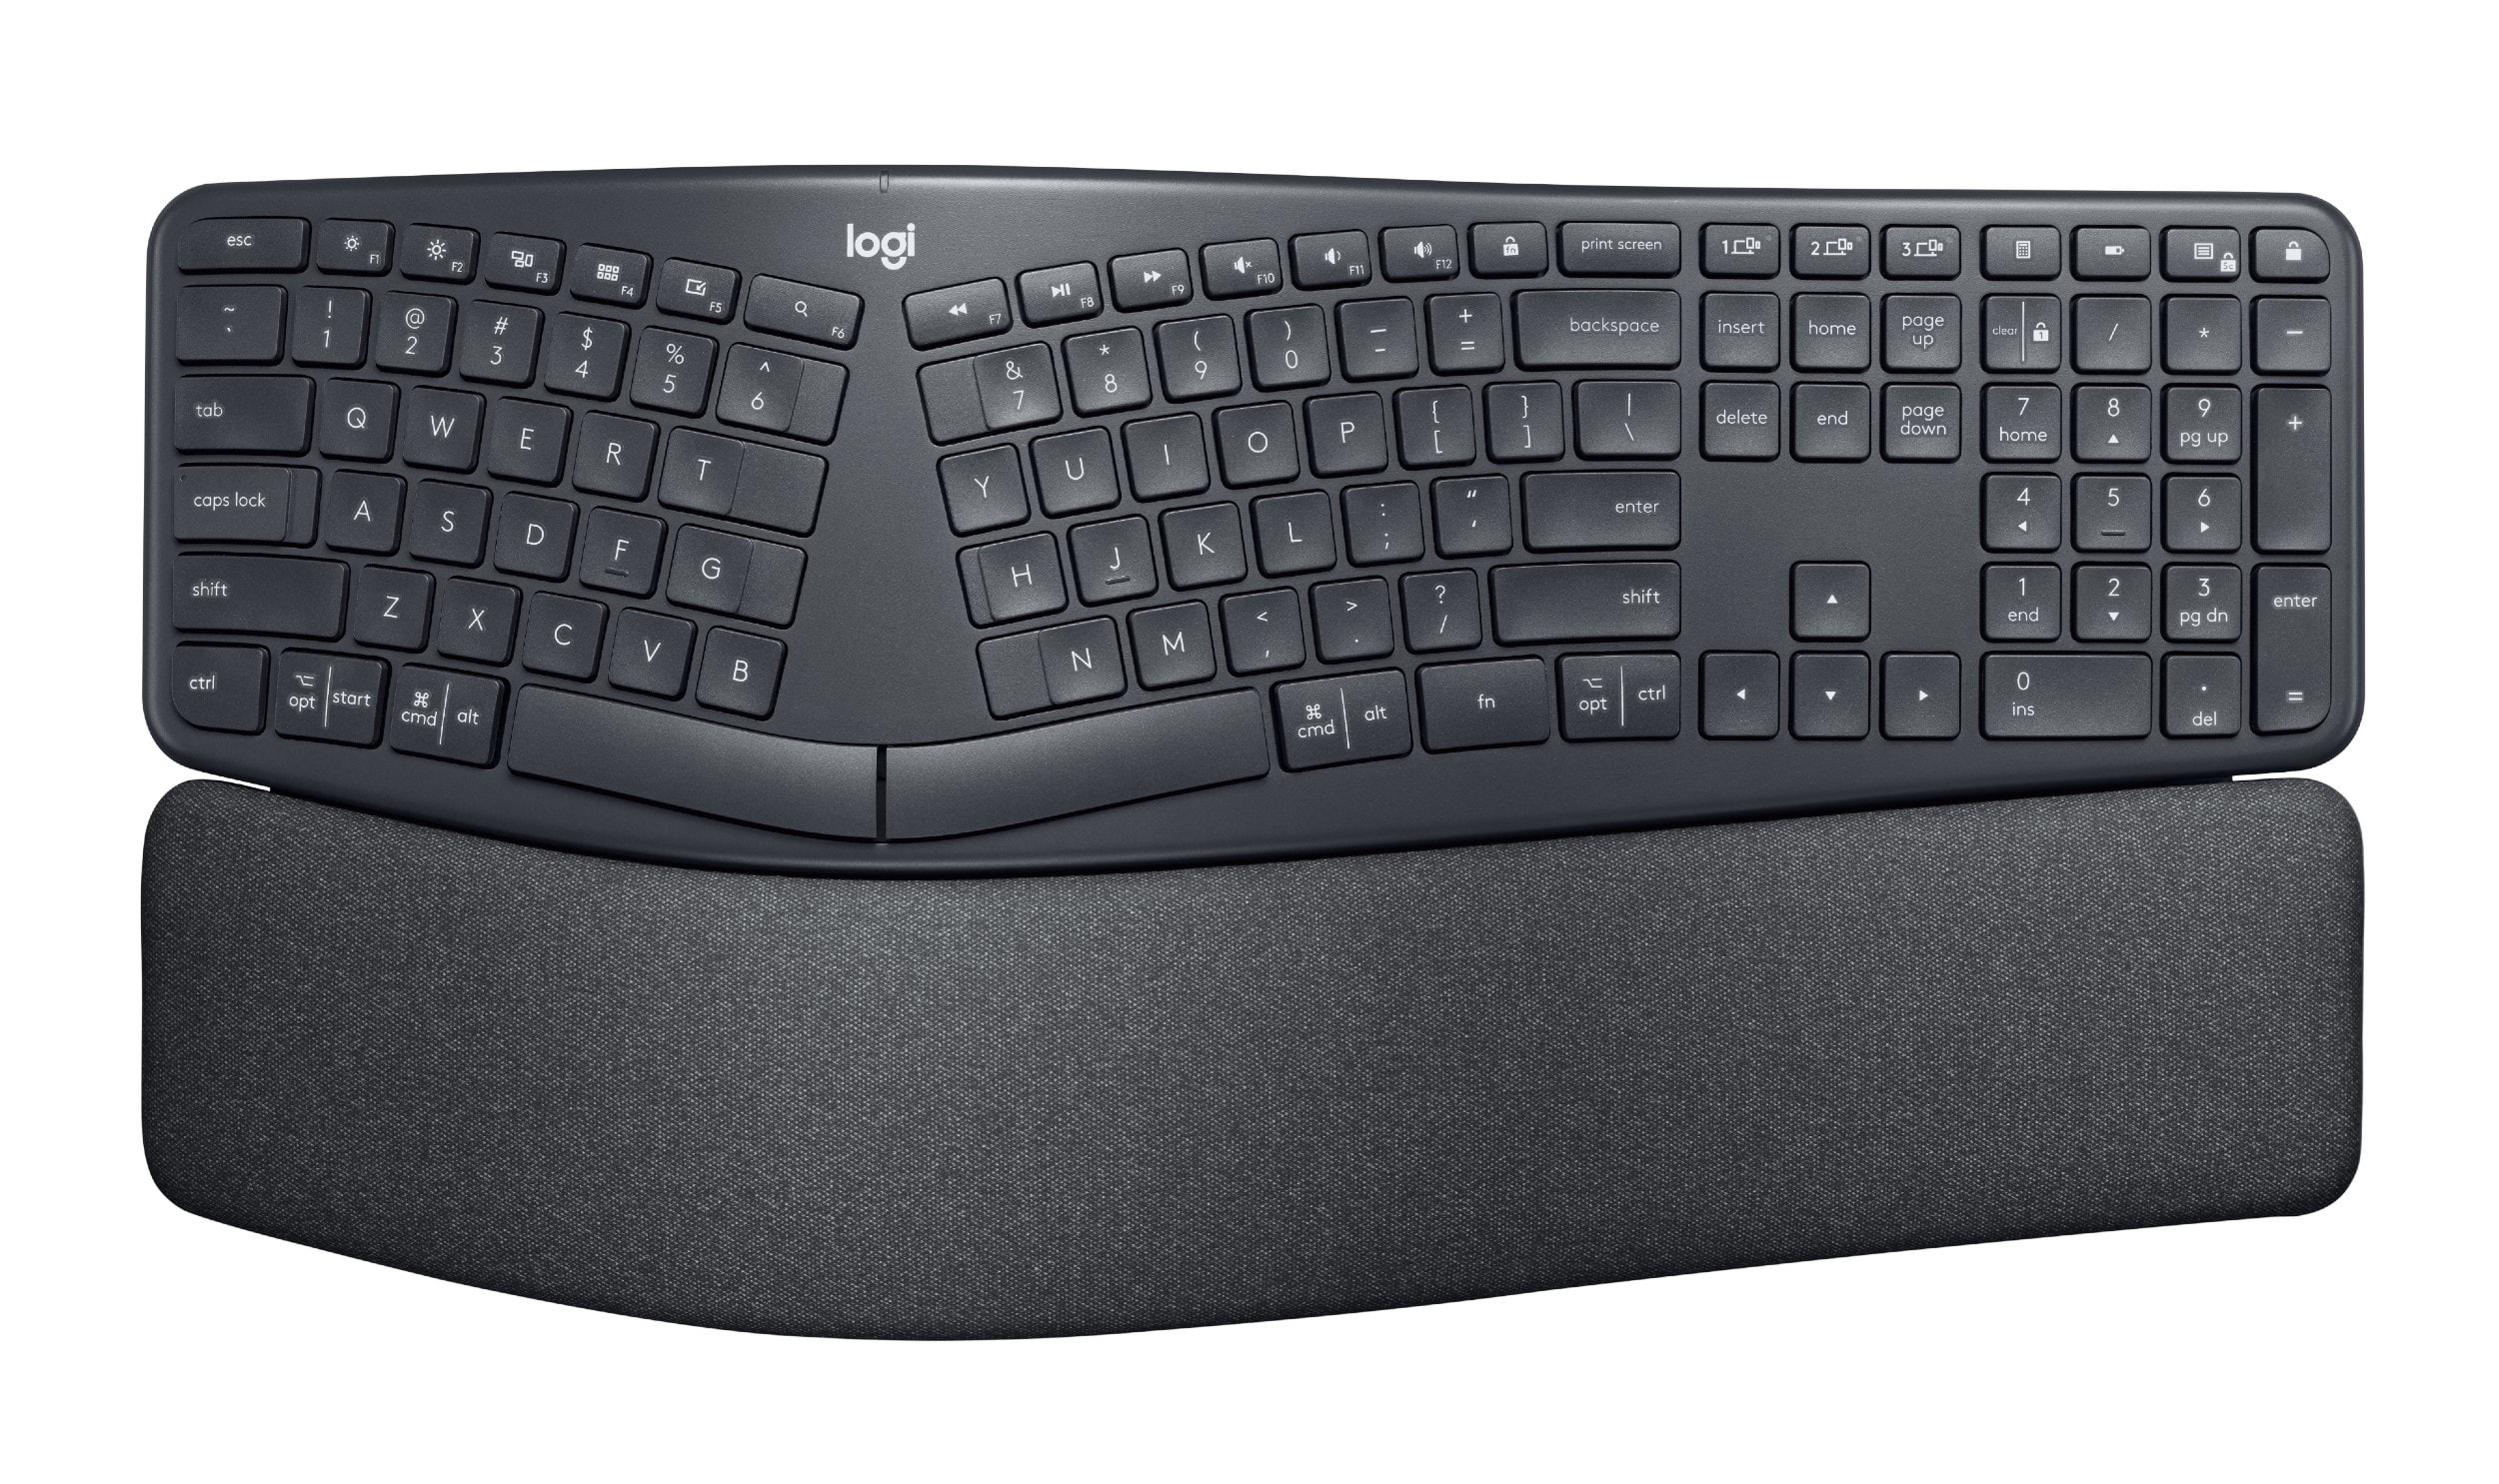 The Logitech Ergo K860 offers pretty much every key you need.